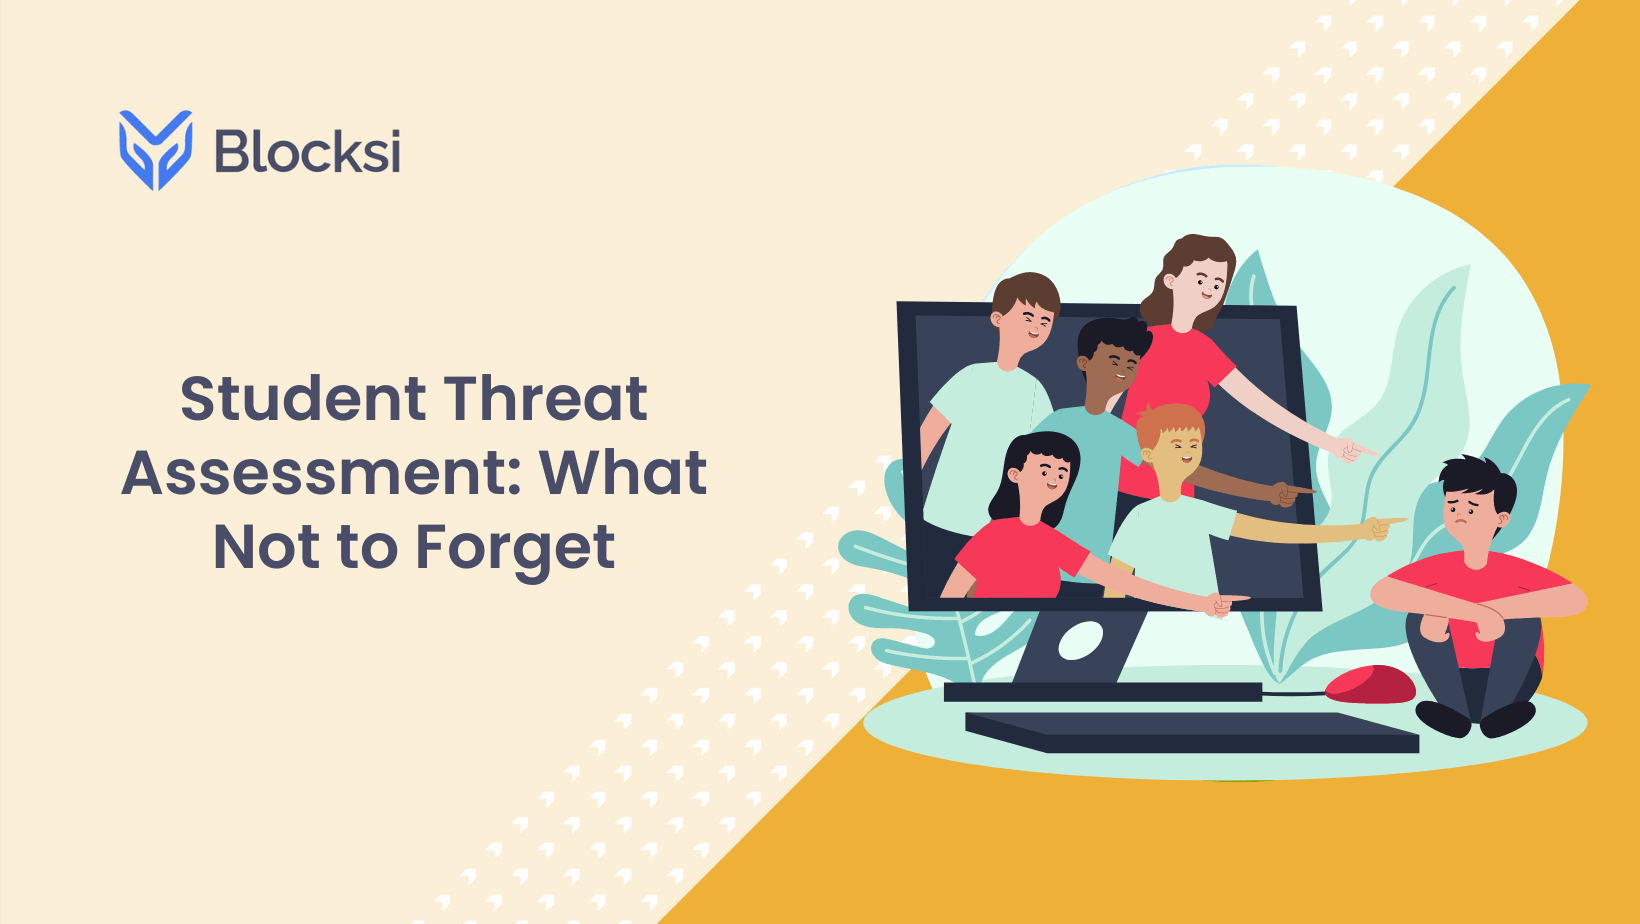 Student Threat Assessment: What Not to Forget